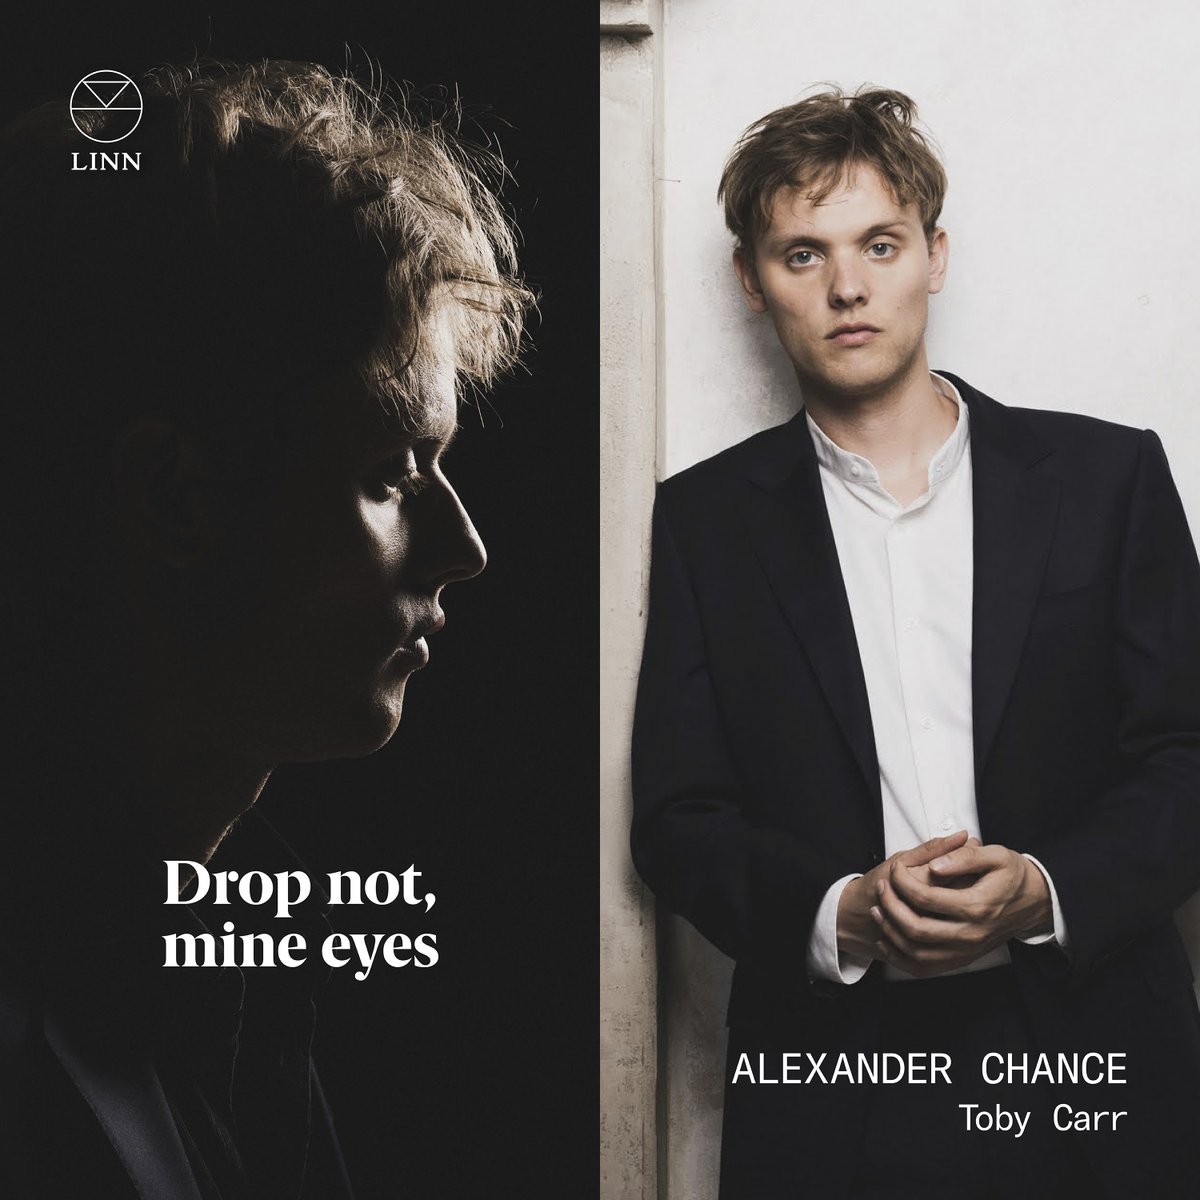 On 28 April we release Drop not, mine eyes by Alexander Chance feat. @toby_carr. This recital of English lute songs soaks up the zeitgeist of the past couple of years in a programme of Dowland, Campion, Danyel, Purcell & others ► Pre-order the album today lnk.to/DropNotMineEye…